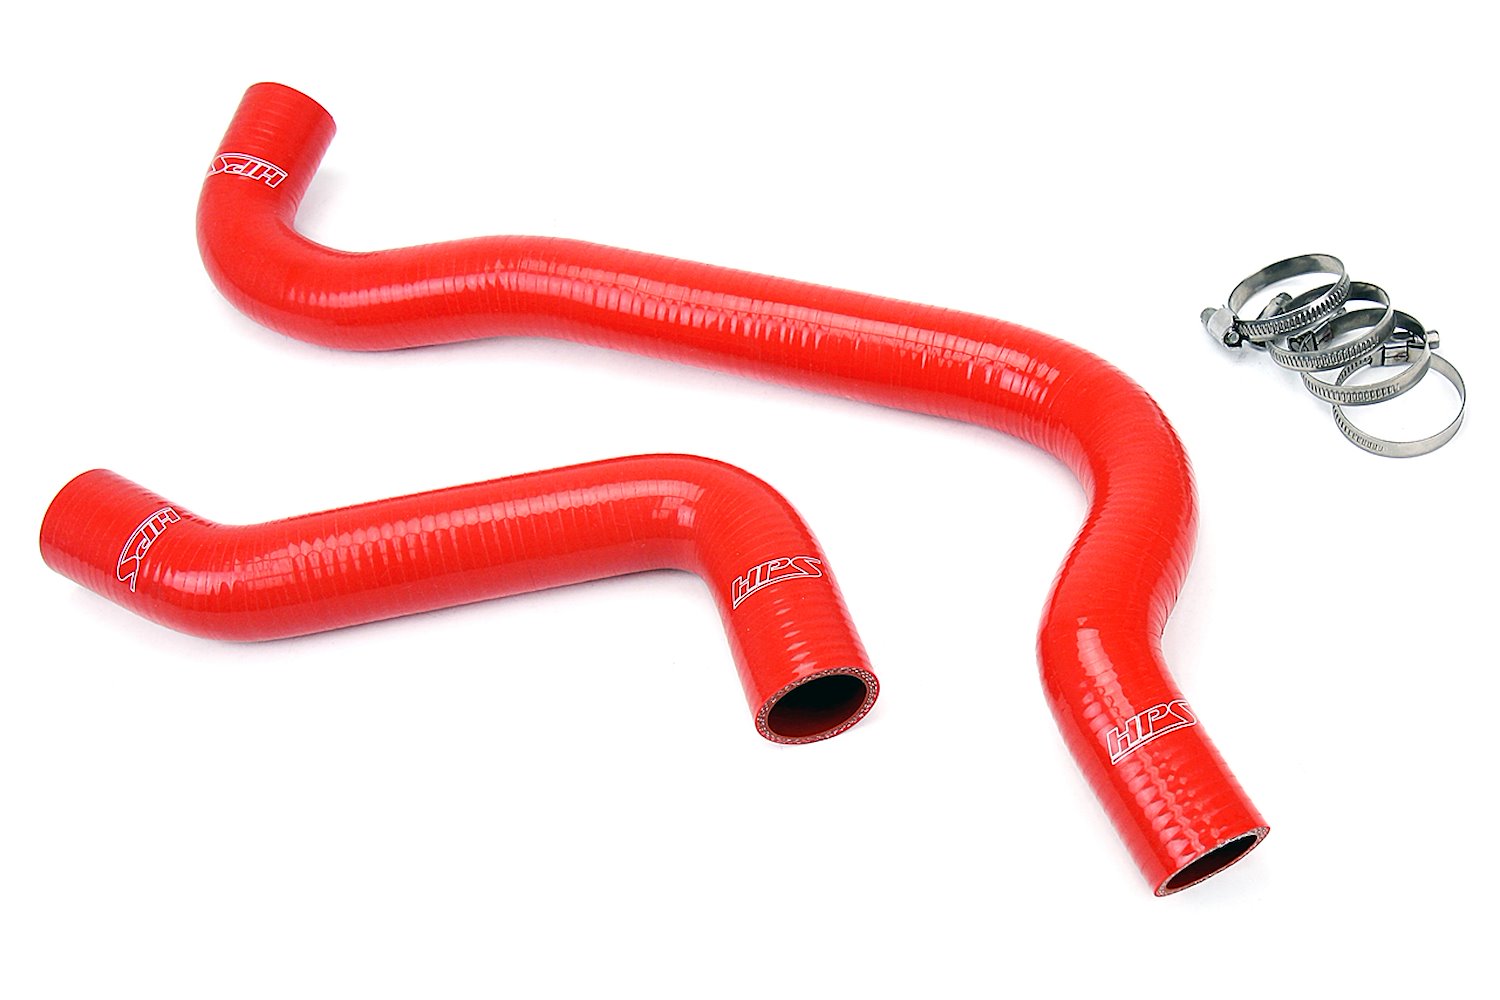 57-1009-RED Radiator Hose Kit, High-Temp 3-Ply Reinforced Silicone, Replace OEM Rubber Radiator Coolant Hoses